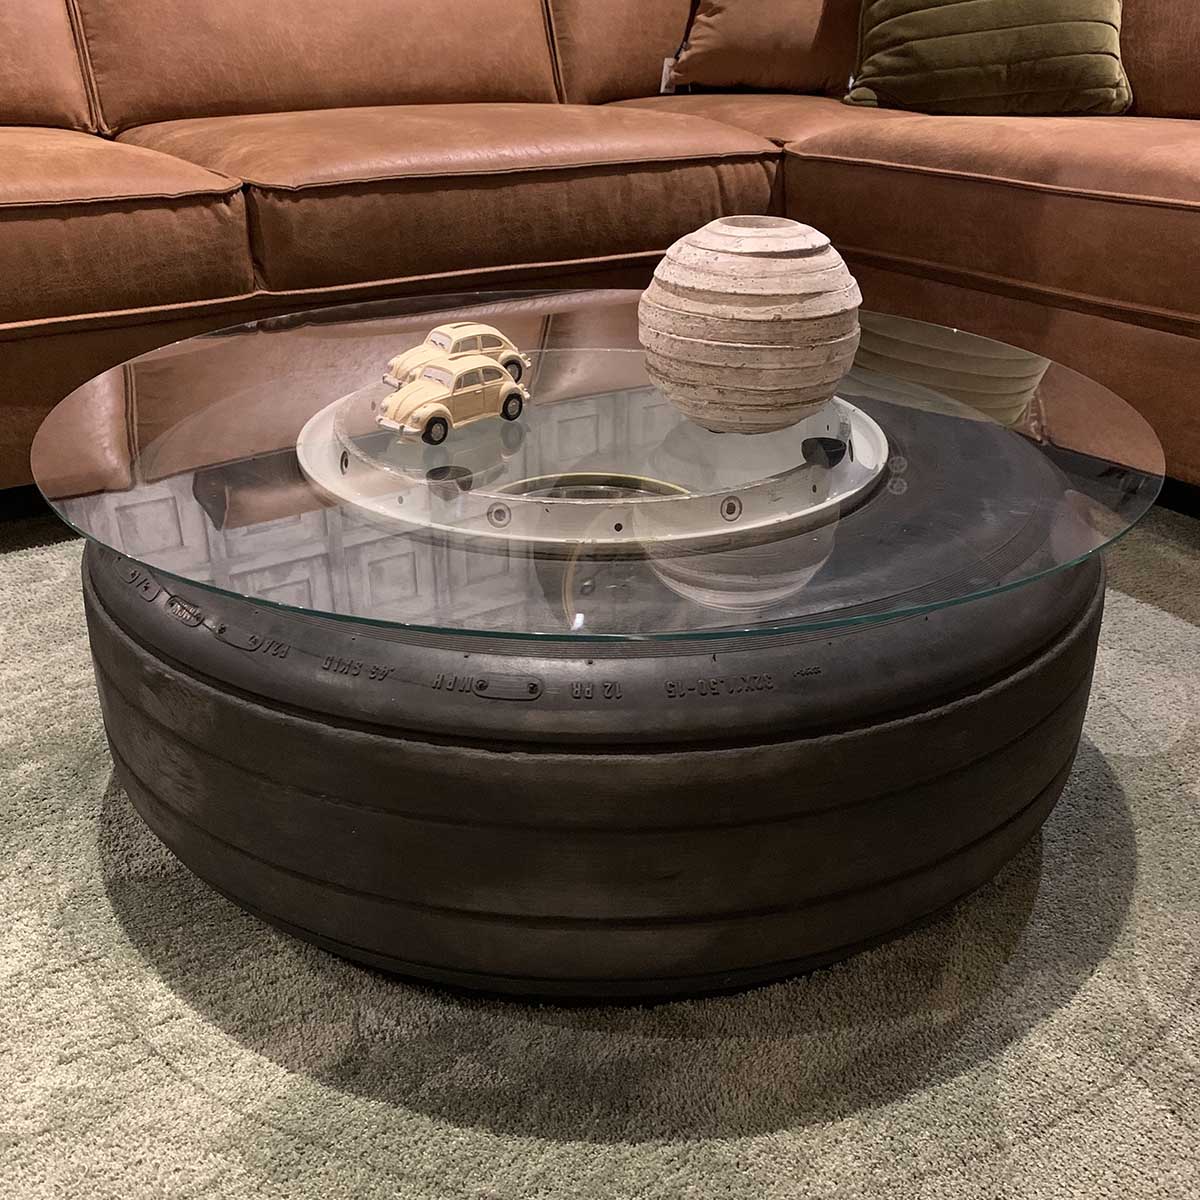 Boeing 727 nosewheel in use as a coffee table in a living room.